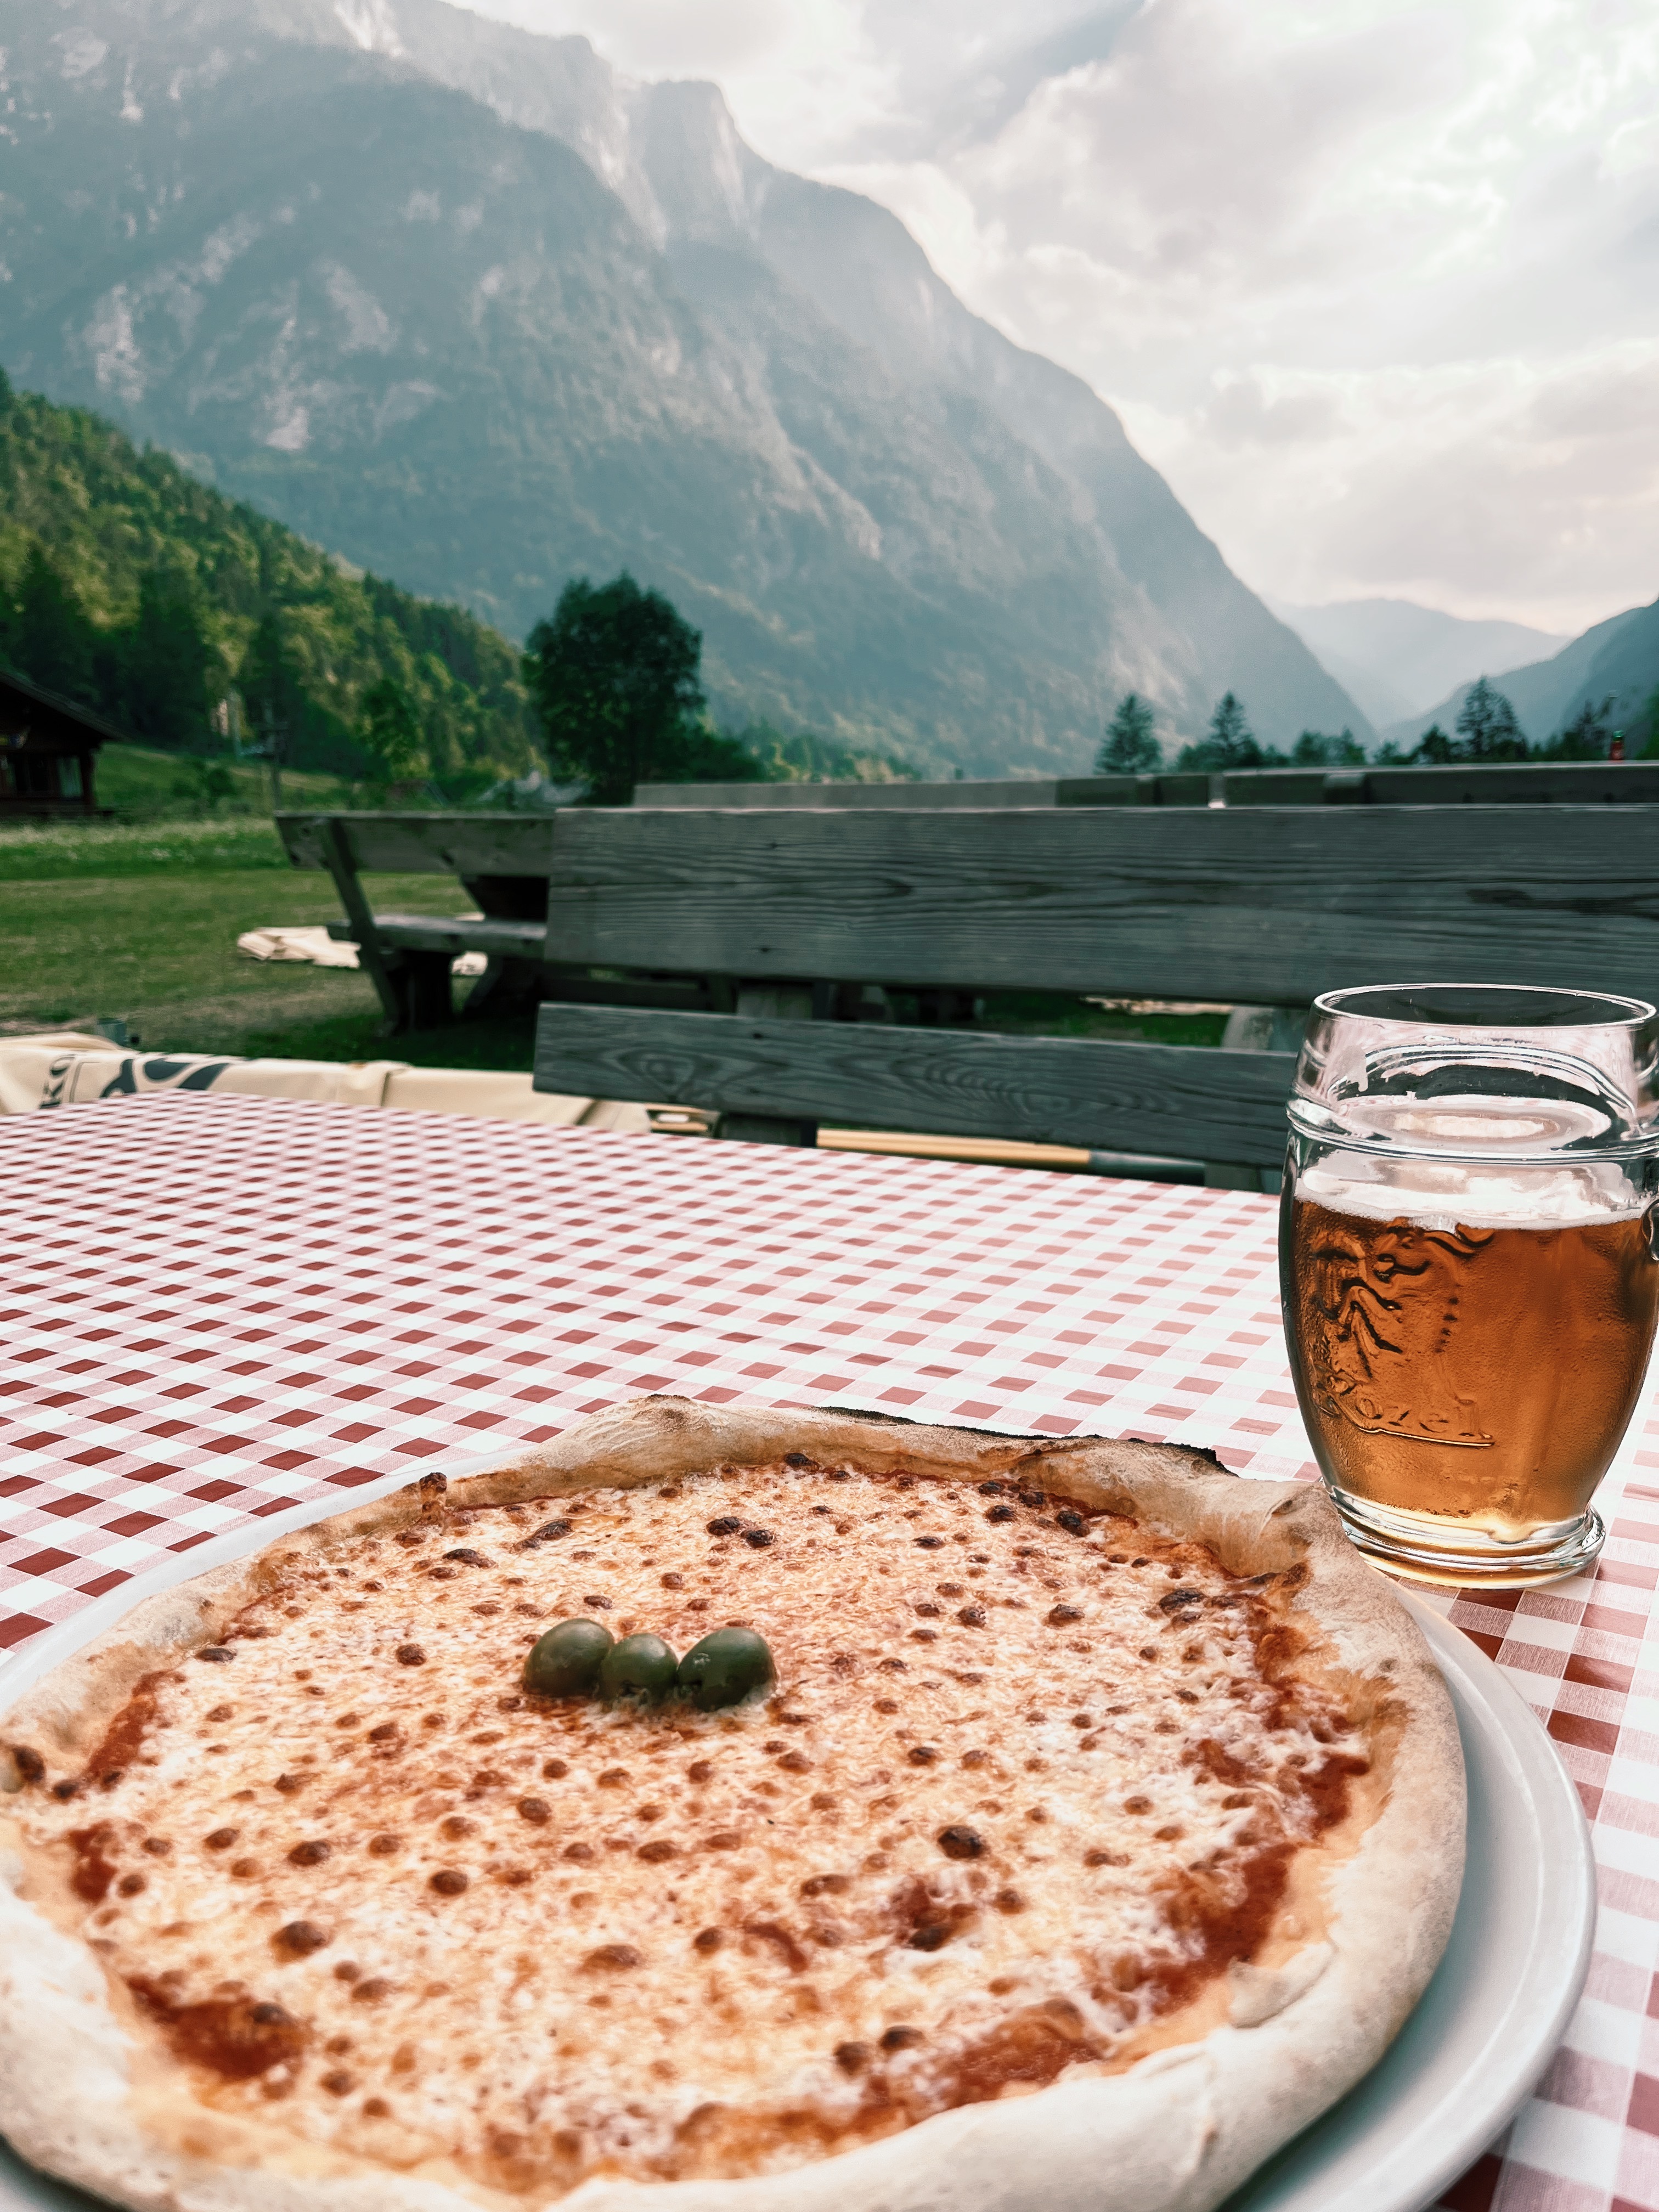 Pizza and Beer with view of the mountains in Trenta, Slovenia while hiking the Alpe Adria Trail